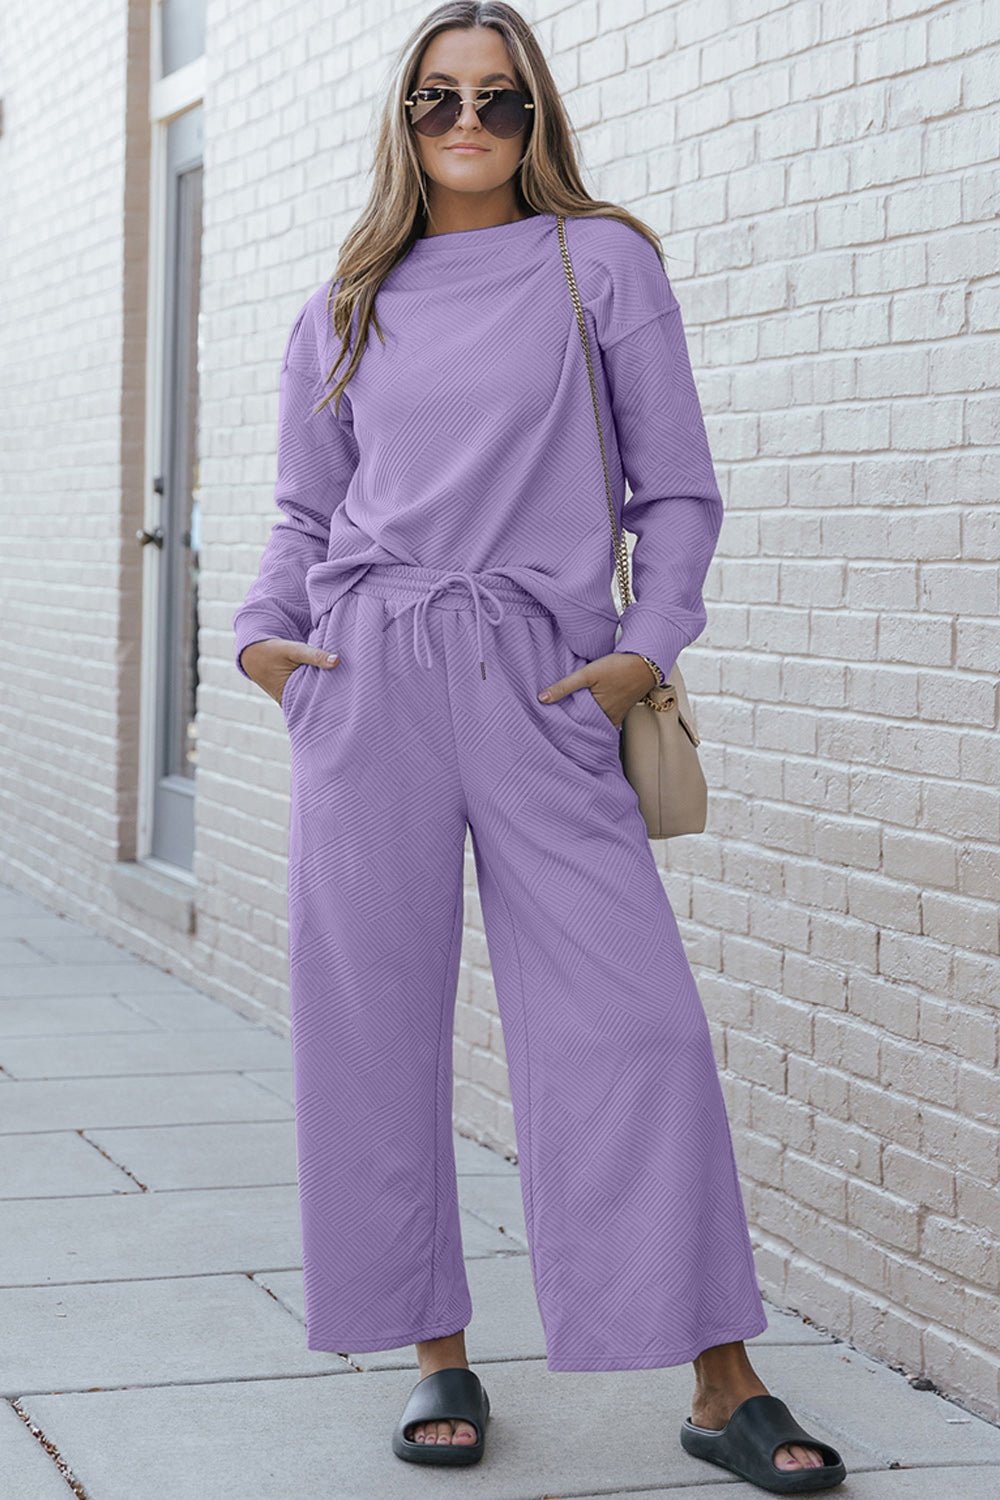 Double Take Full Size Textured Long Sleeve Top and Drawstring Pants Set Lavender 3XL 